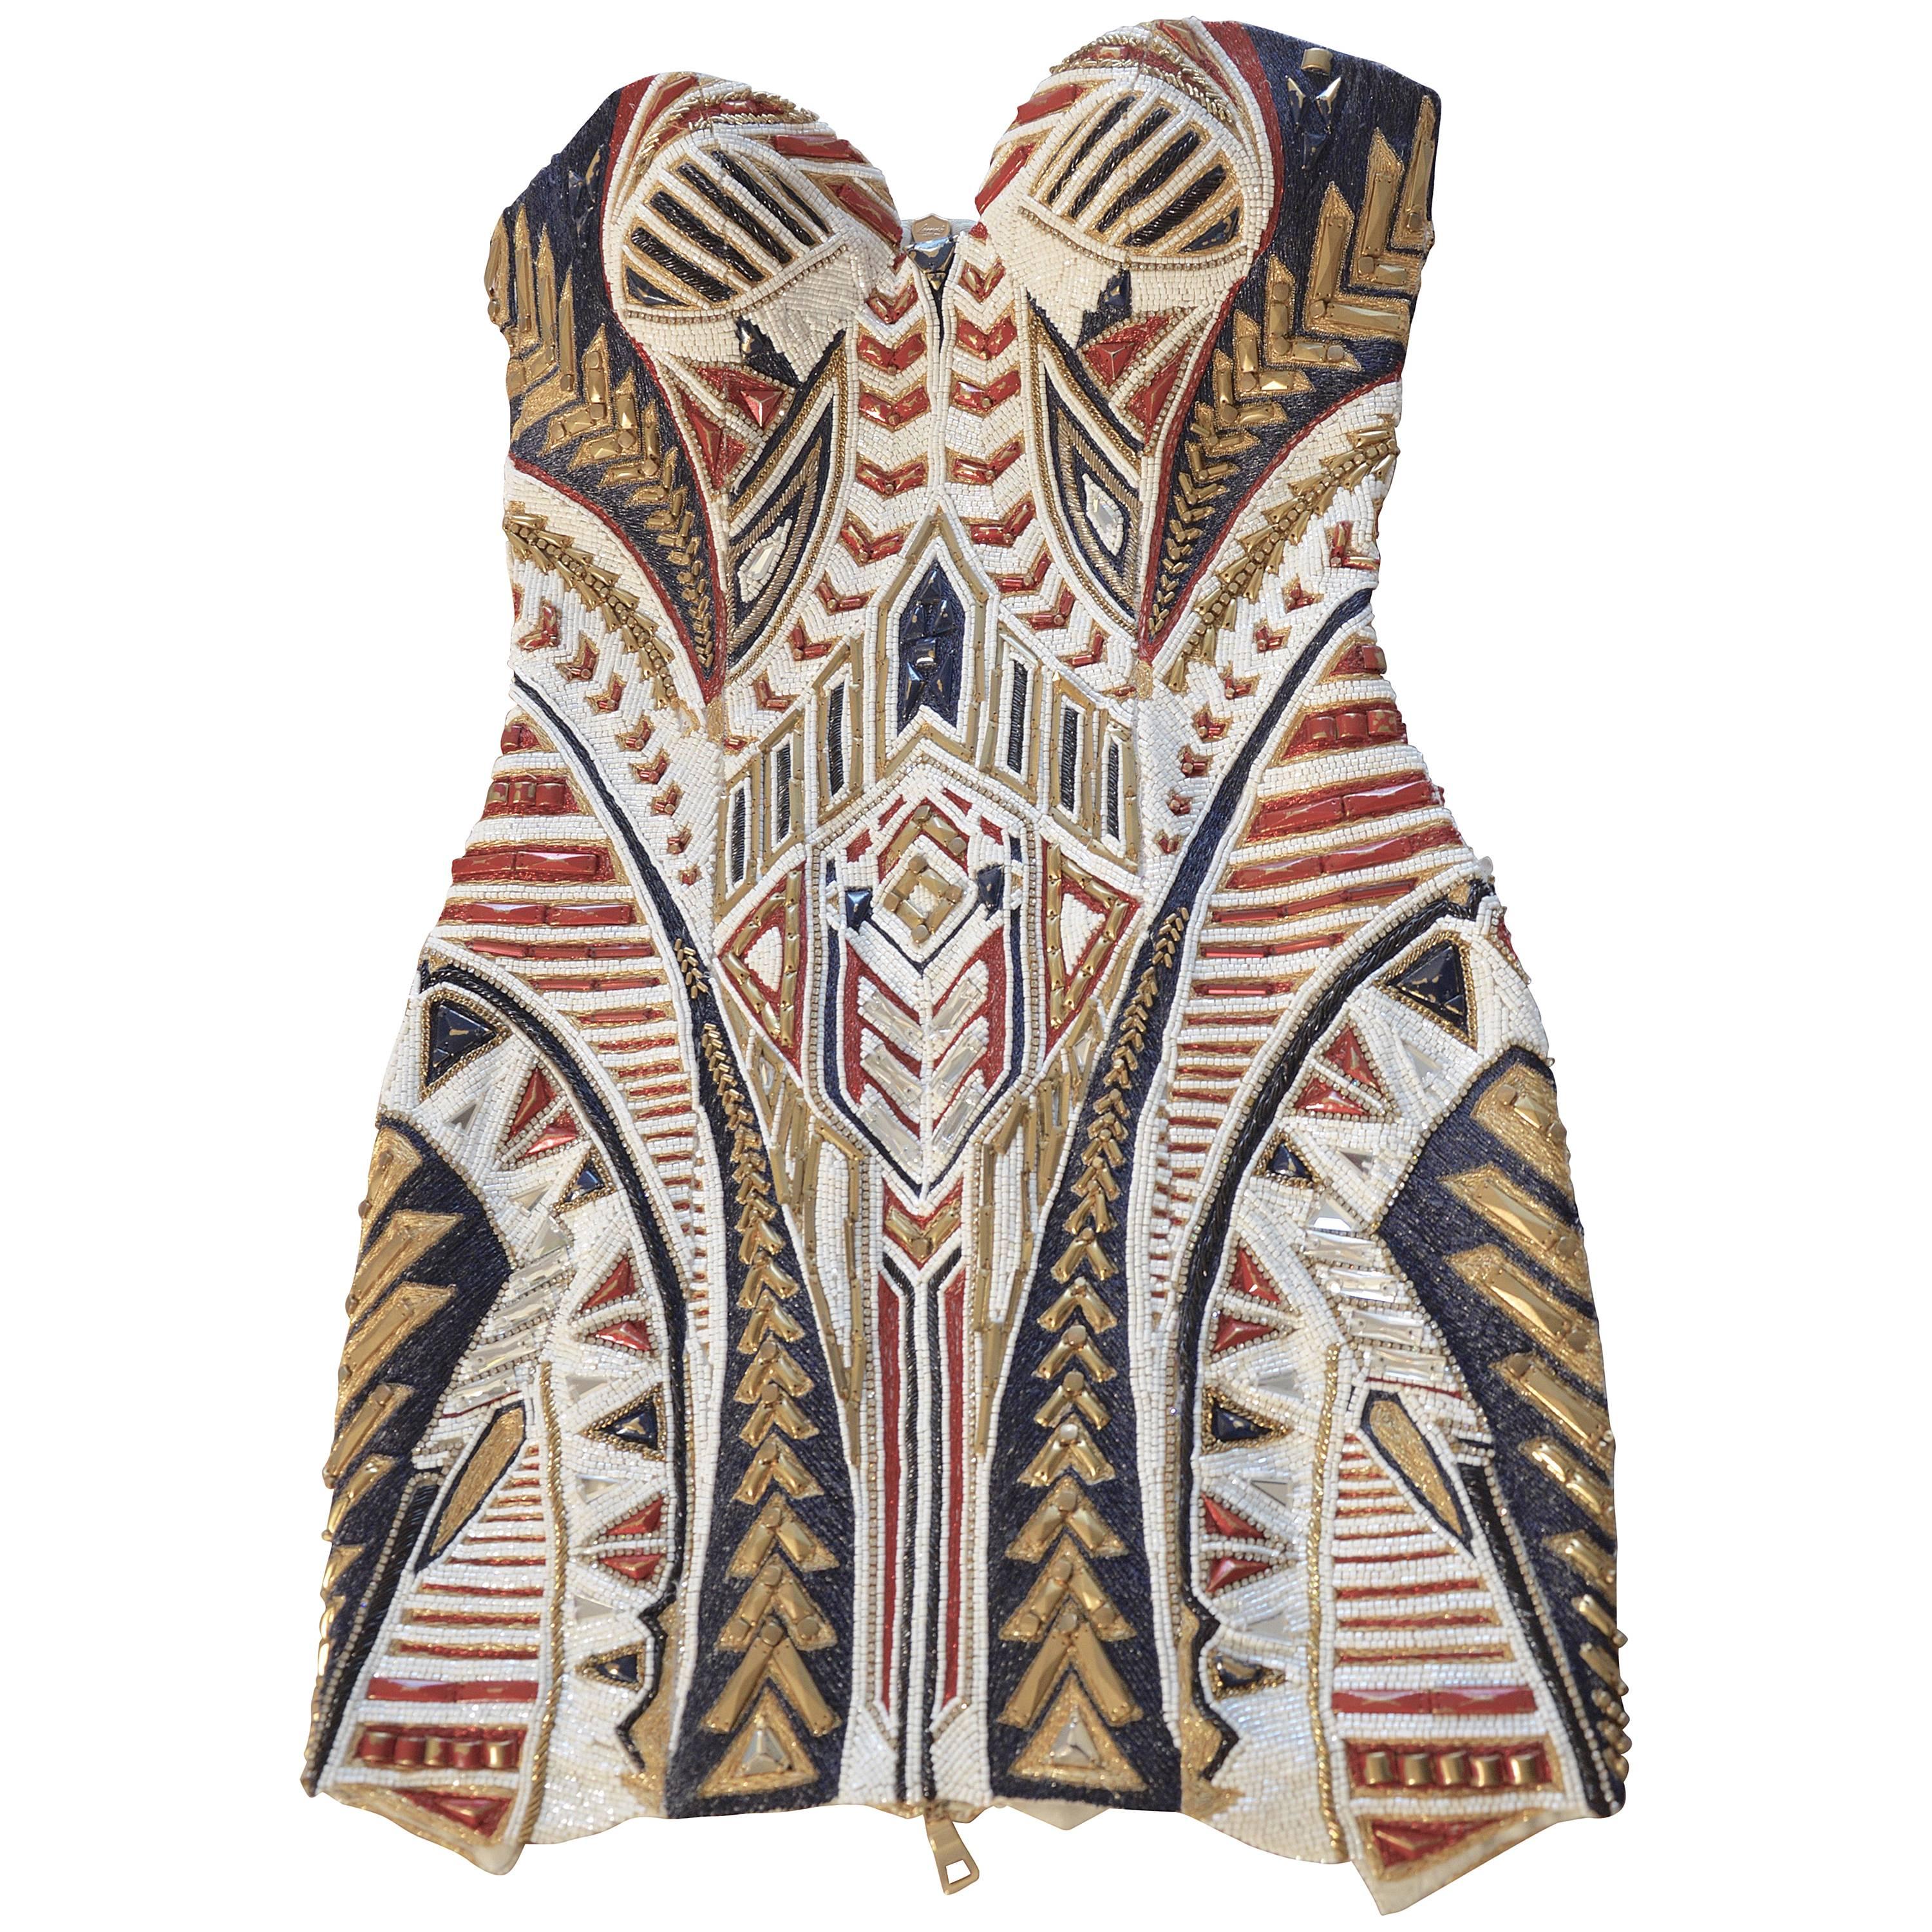 Unique Balmain Olivier Rousteing Body-Molding Mexican-style Embroidered Dress